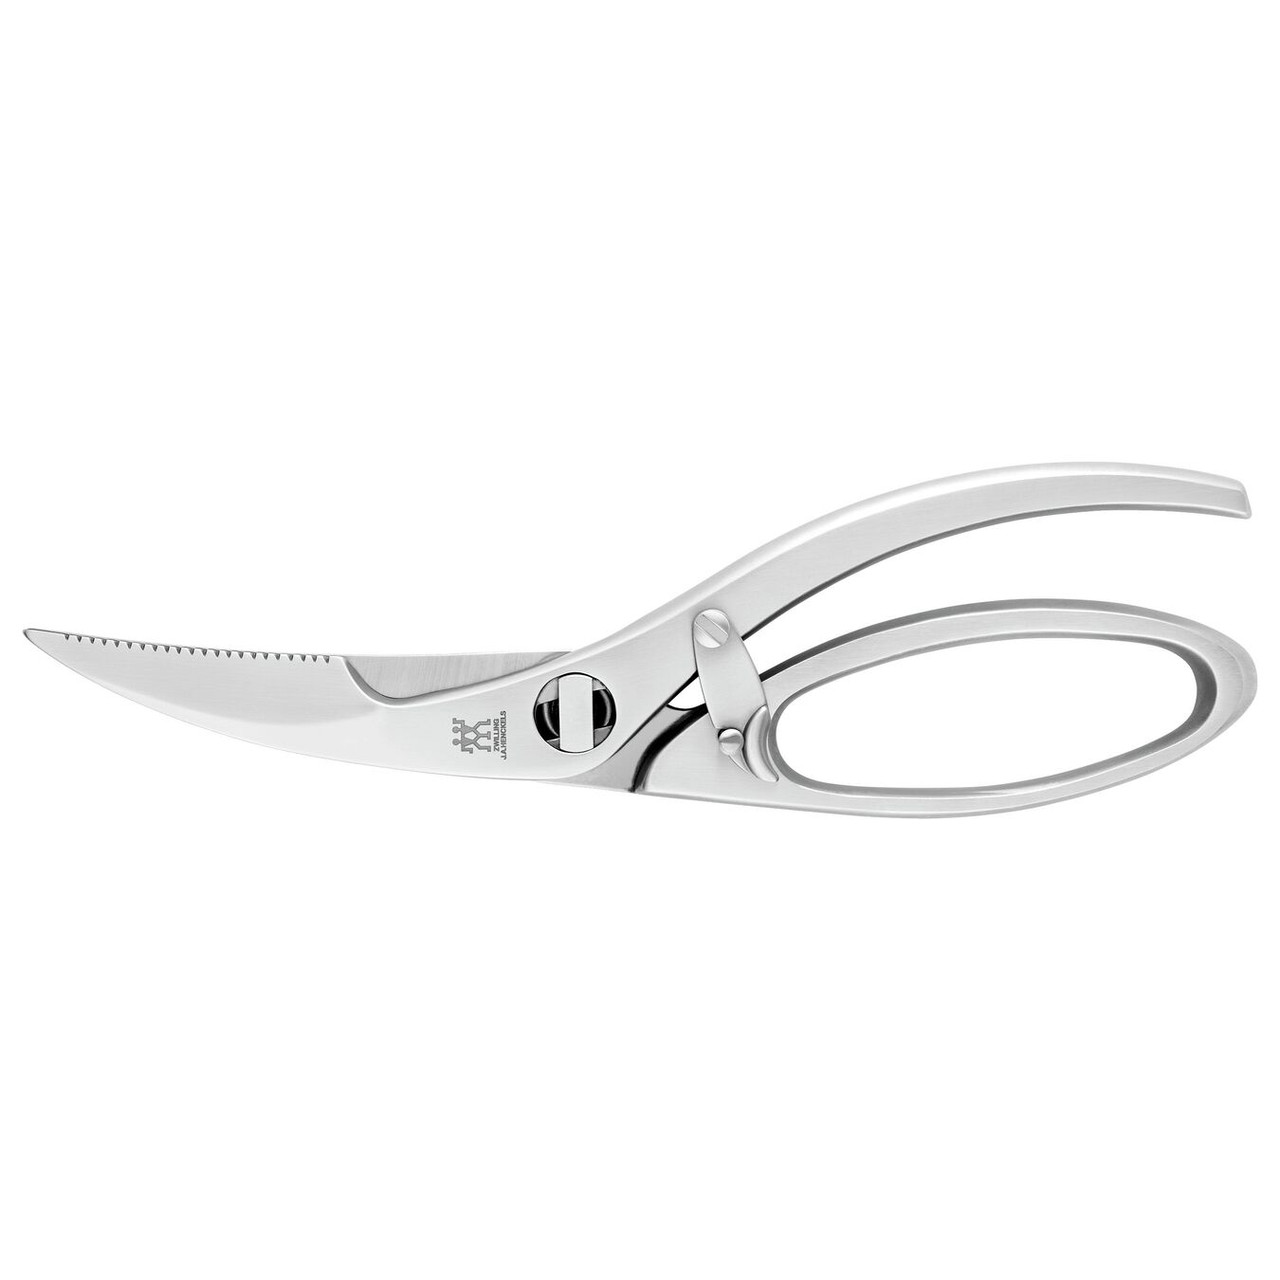 https://cdn11.bigcommerce.com/s-hccytny0od/images/stencil/1280x1280/products/2741/9765/zwilling-ja-henckels-twin-select-take-apart-poultry-shears__47916.1566031580.jpg?c=2?imbypass=on